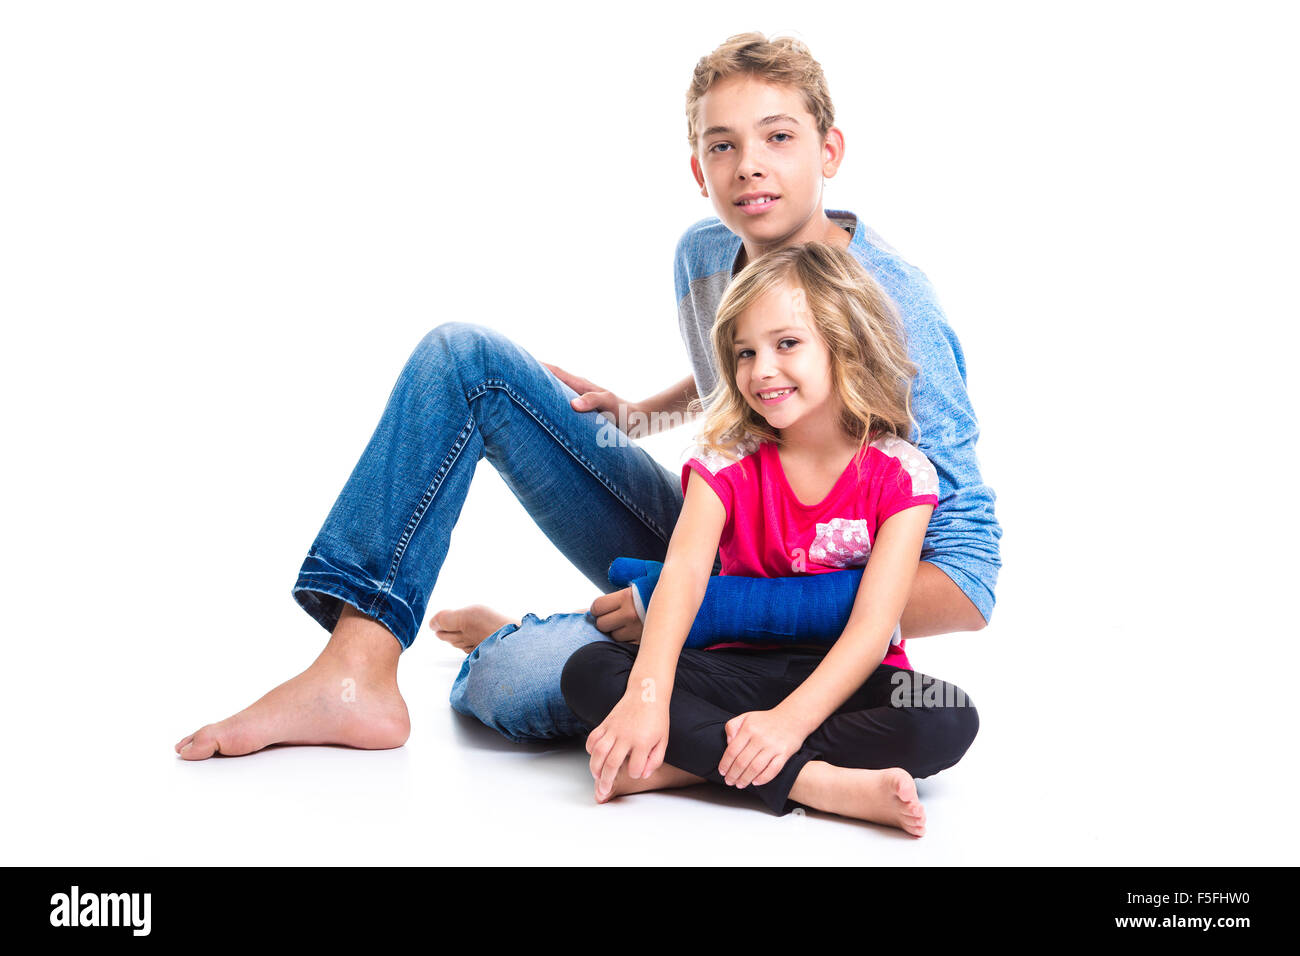 beautiful children teenager boy with is young sister Stock Photo